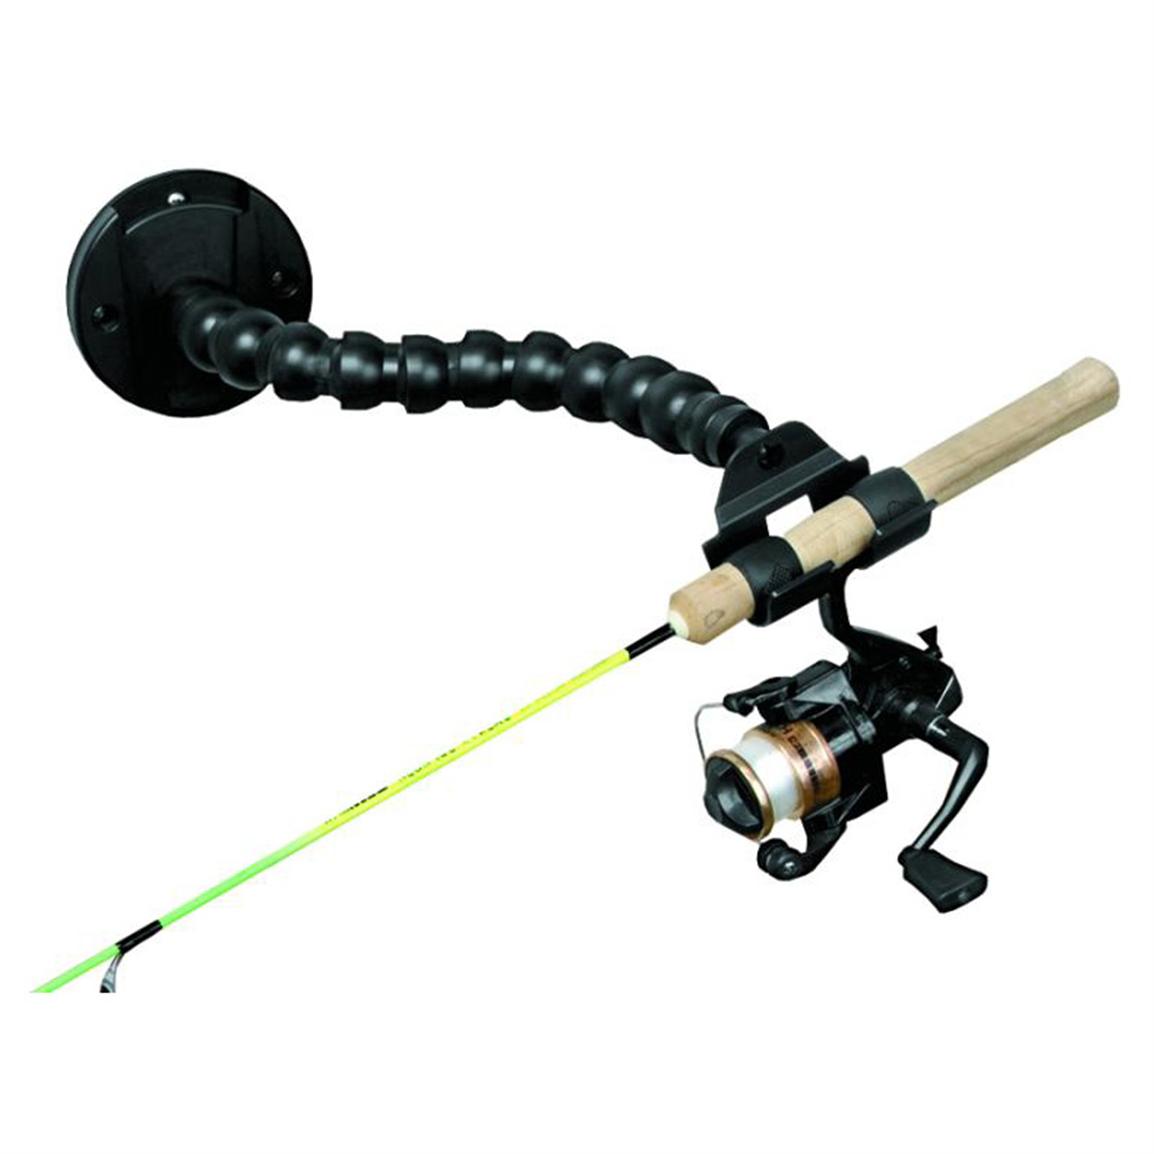 Catch Cover MultiFlex Rod Holder with Quick Disc Wall